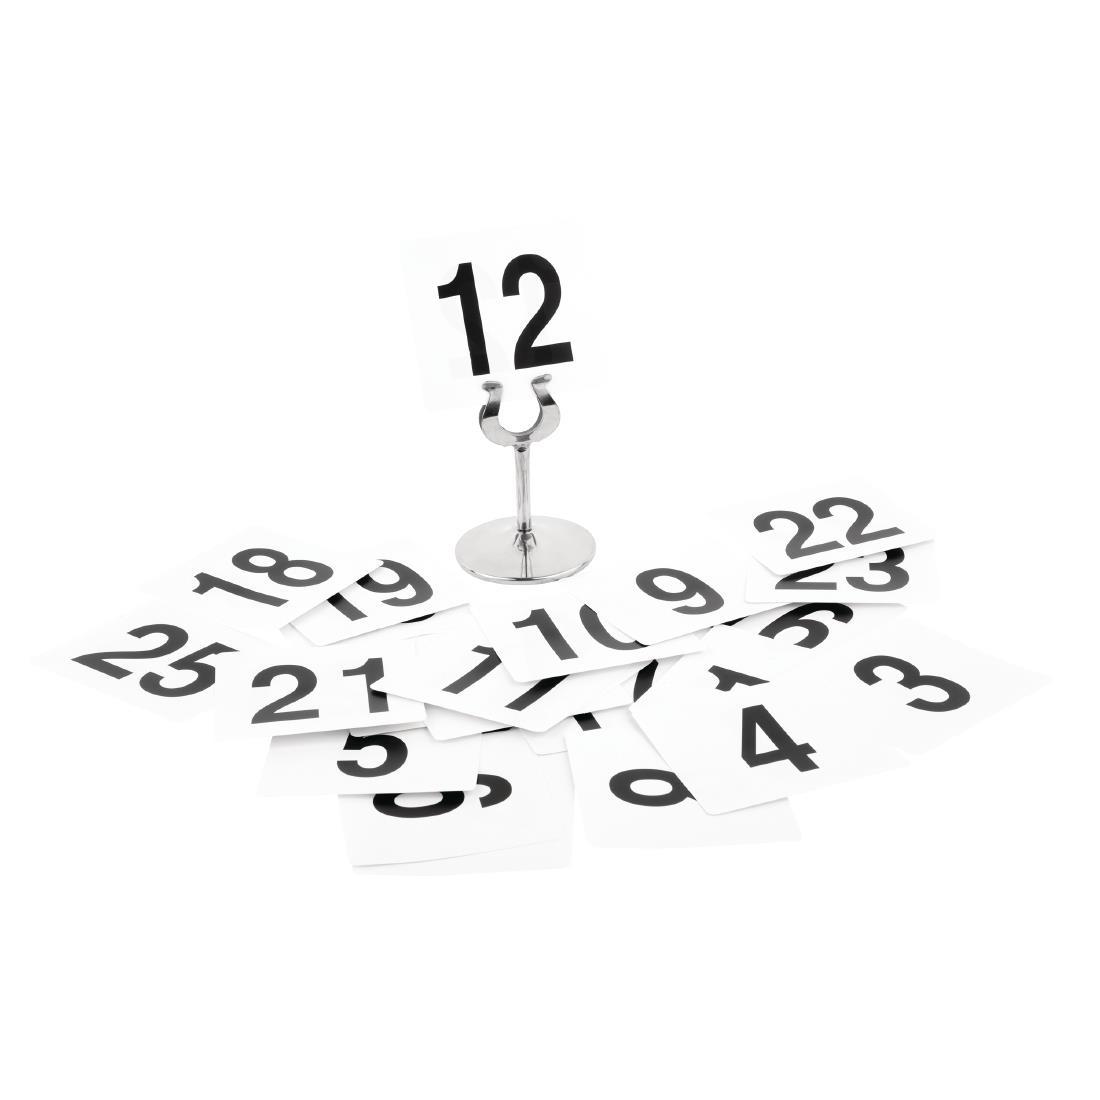 Plastic Table Numbers Inserts 1-25 - GC086  - 1